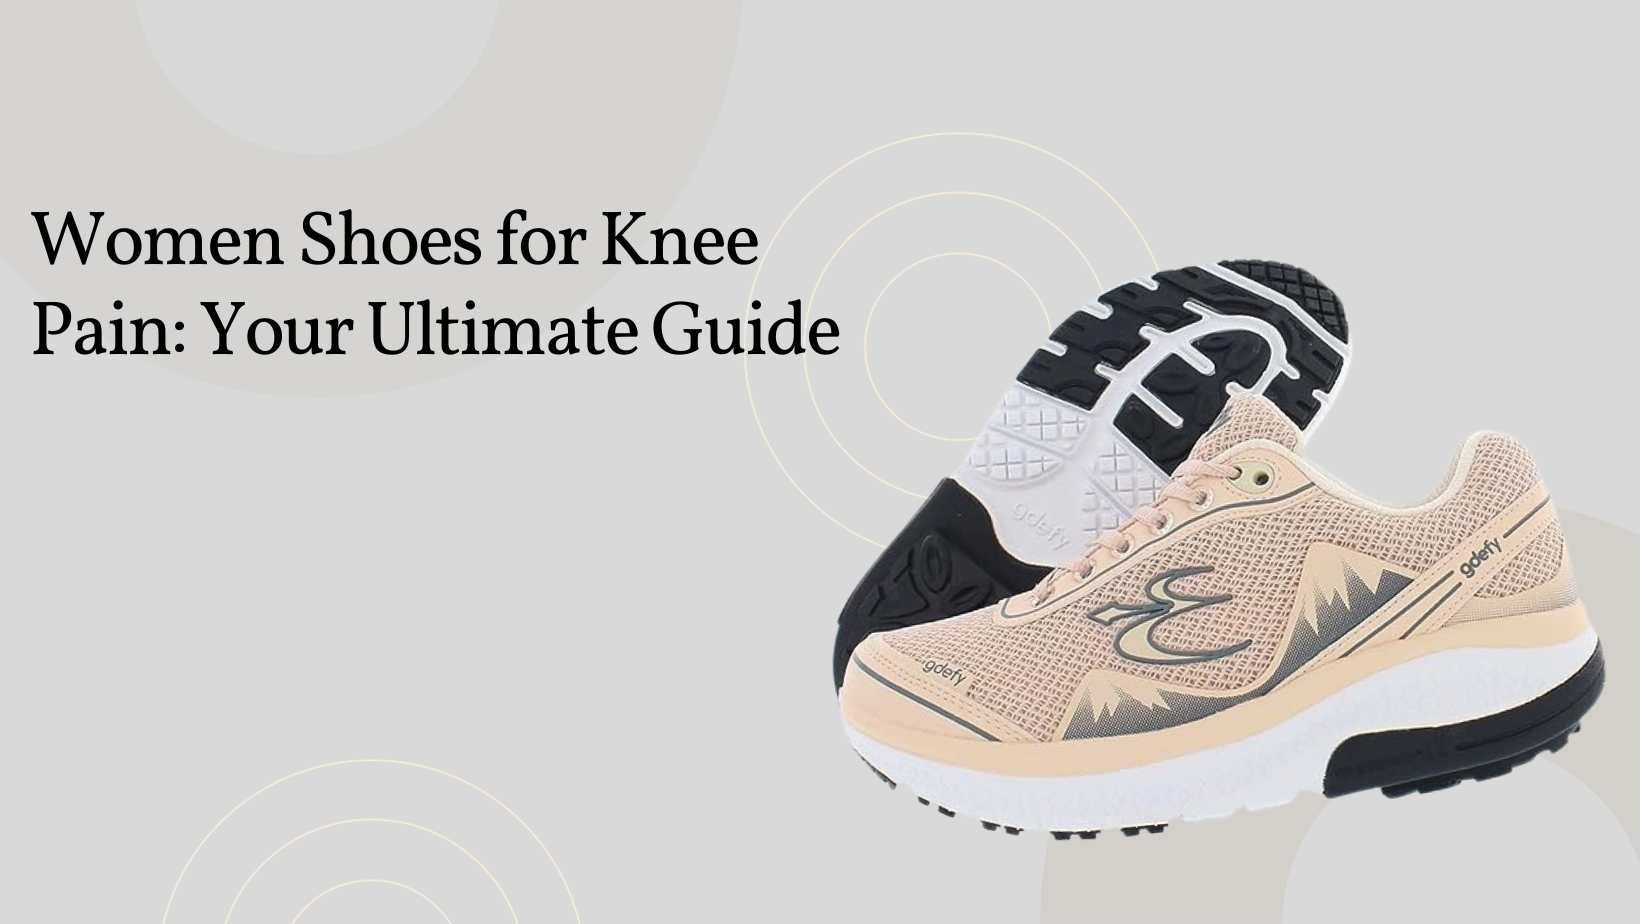 Women Shoes for Knee Pain: Your Ultimate Guide